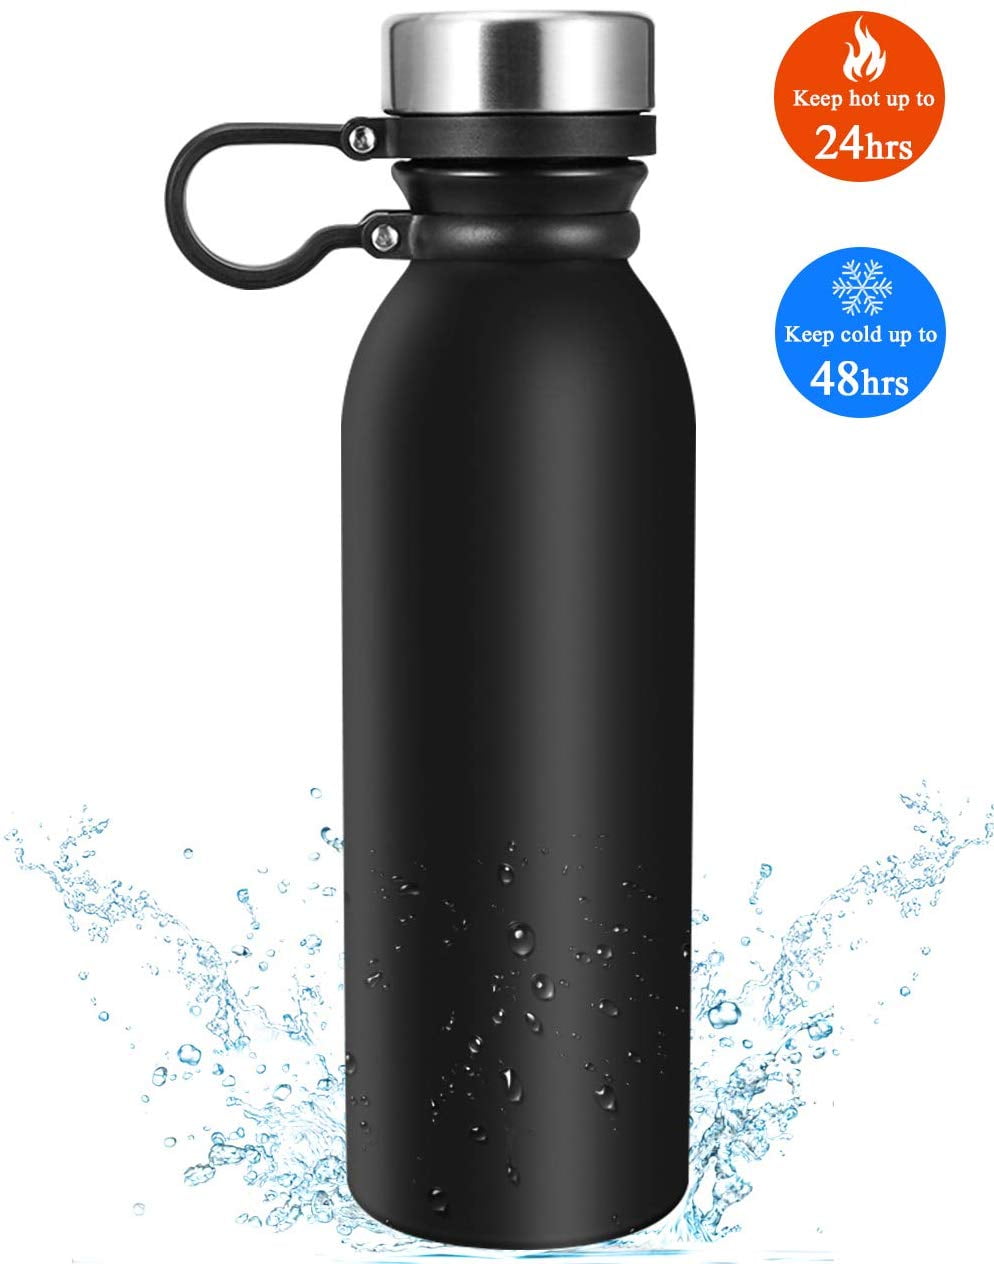 Omnia h2o Stainless Steel Vaccum Insulated Wide Mouth Water Bottle BPA Free 18oz 